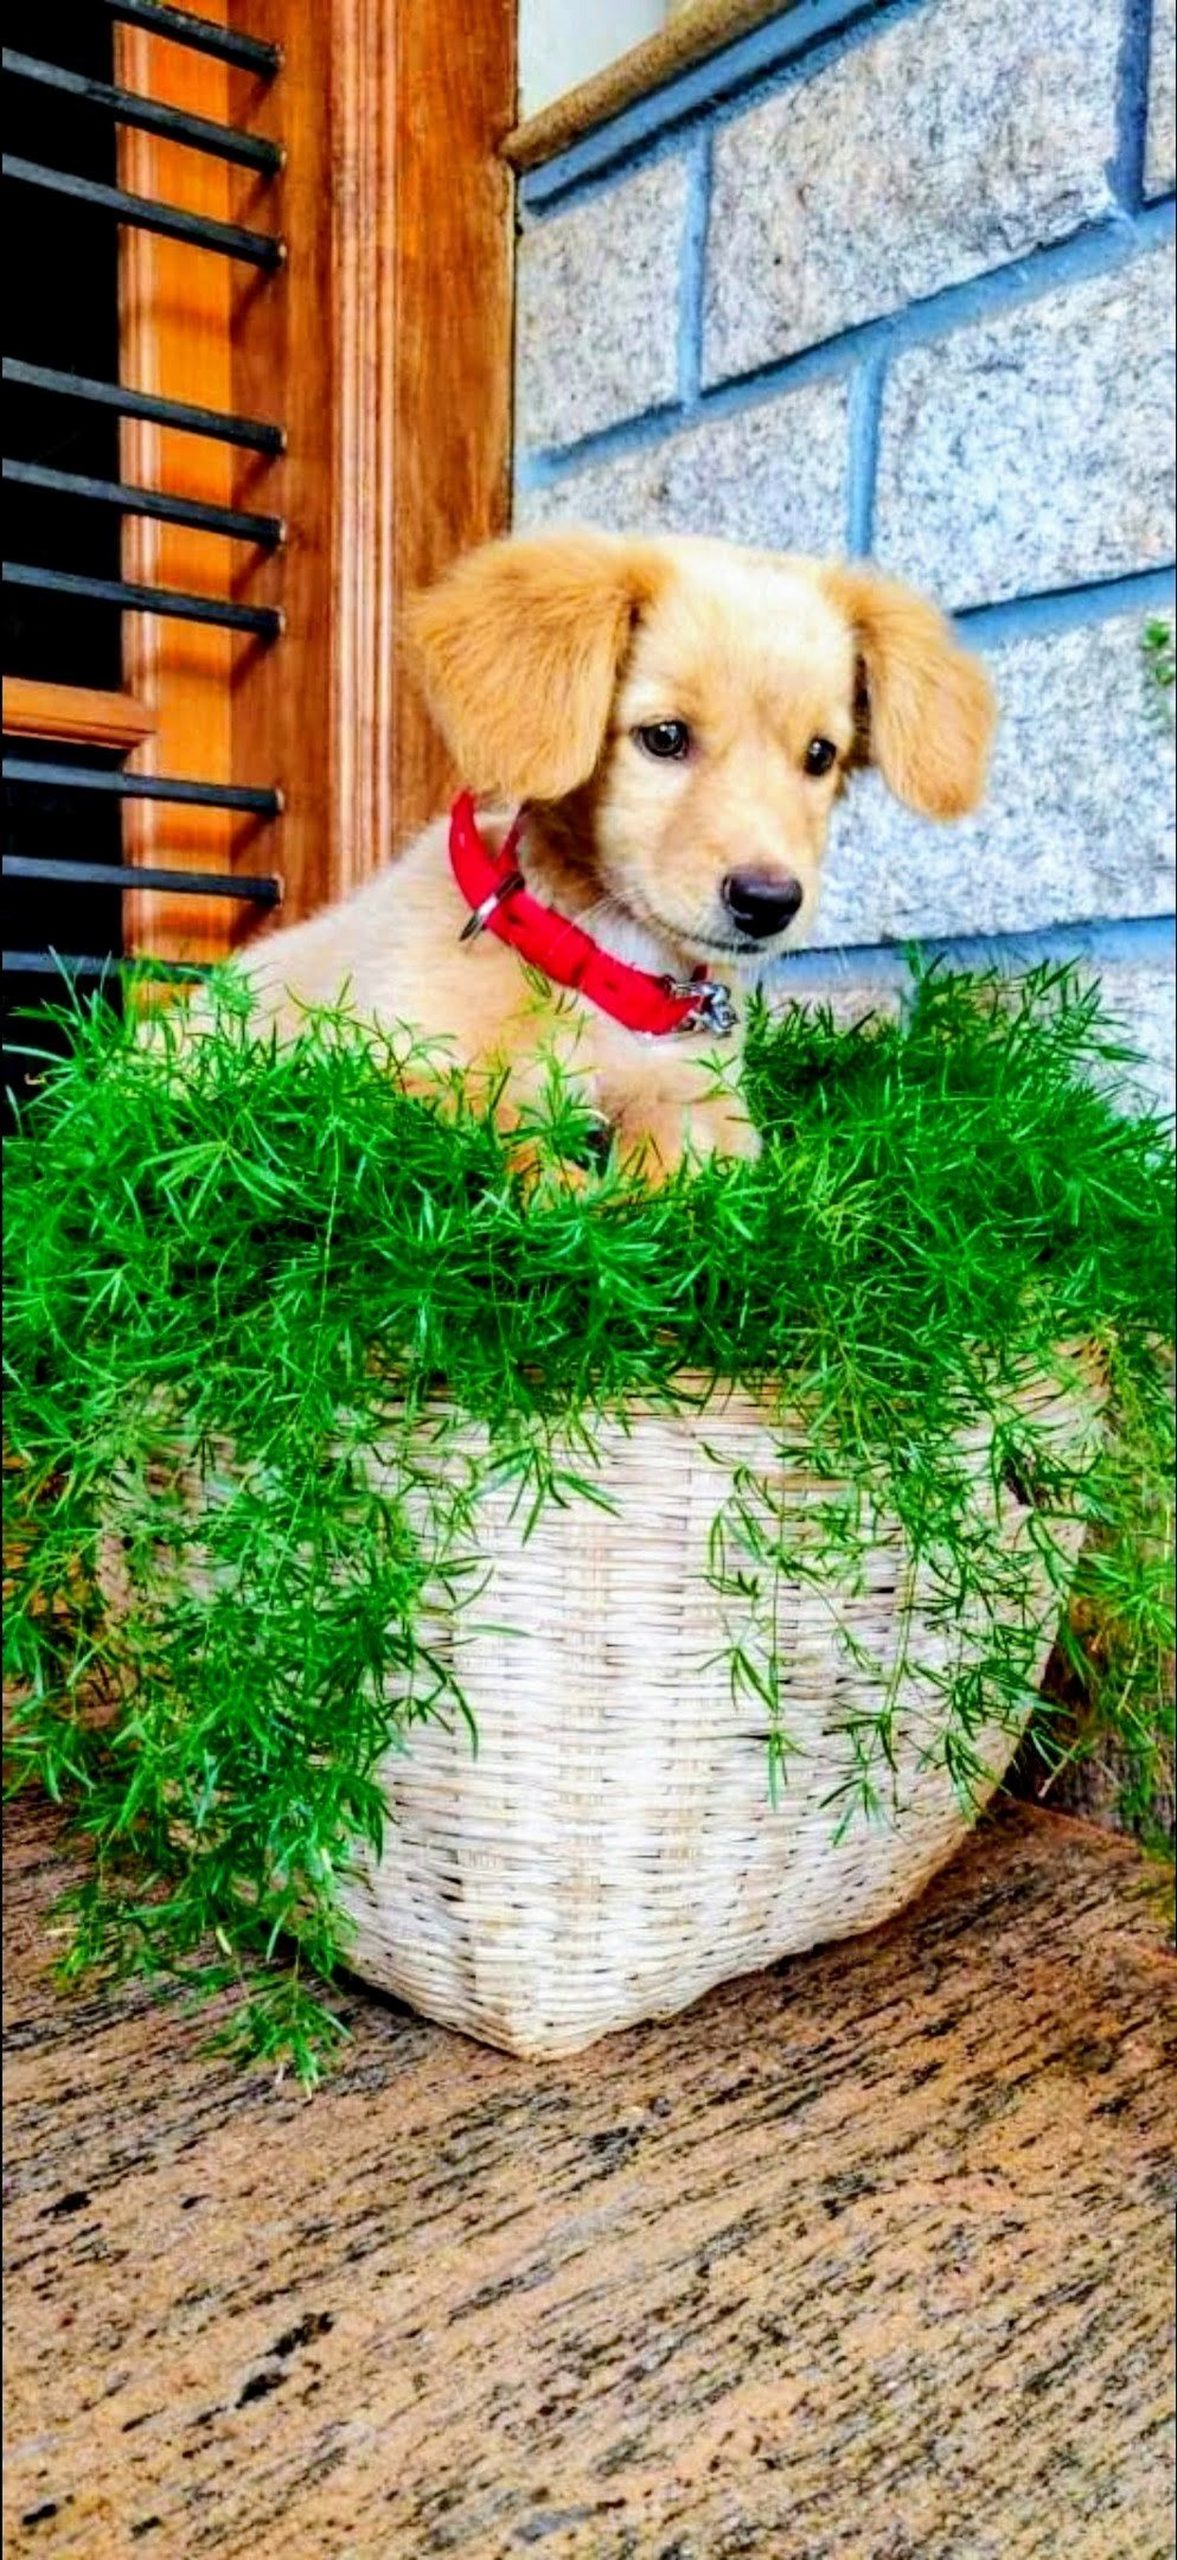 A puppy on houseplant